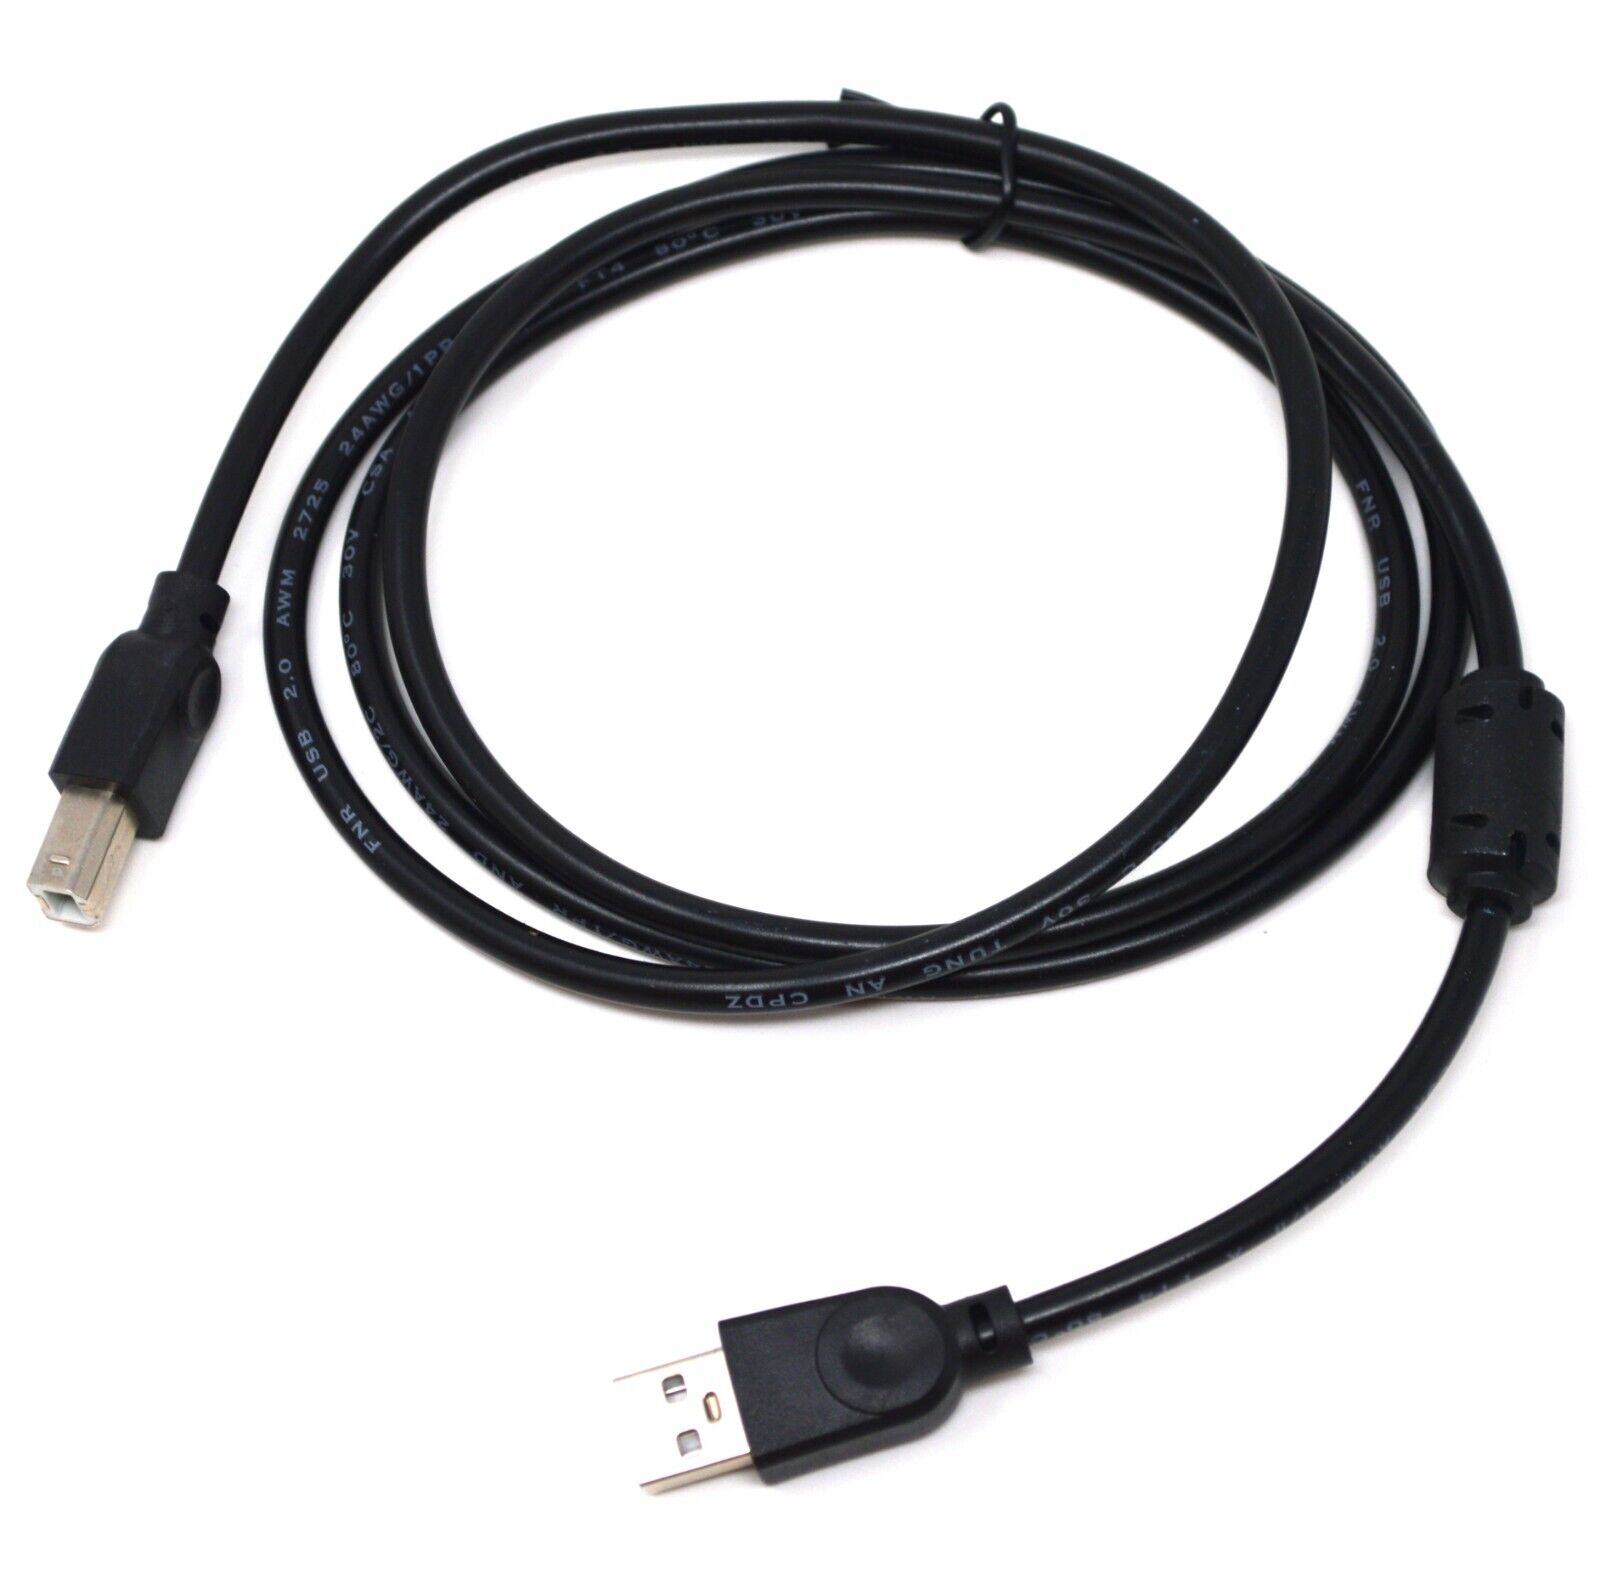 Printer Cables (USB-B to USB-A) High quality printer Cable 4.5FT lot